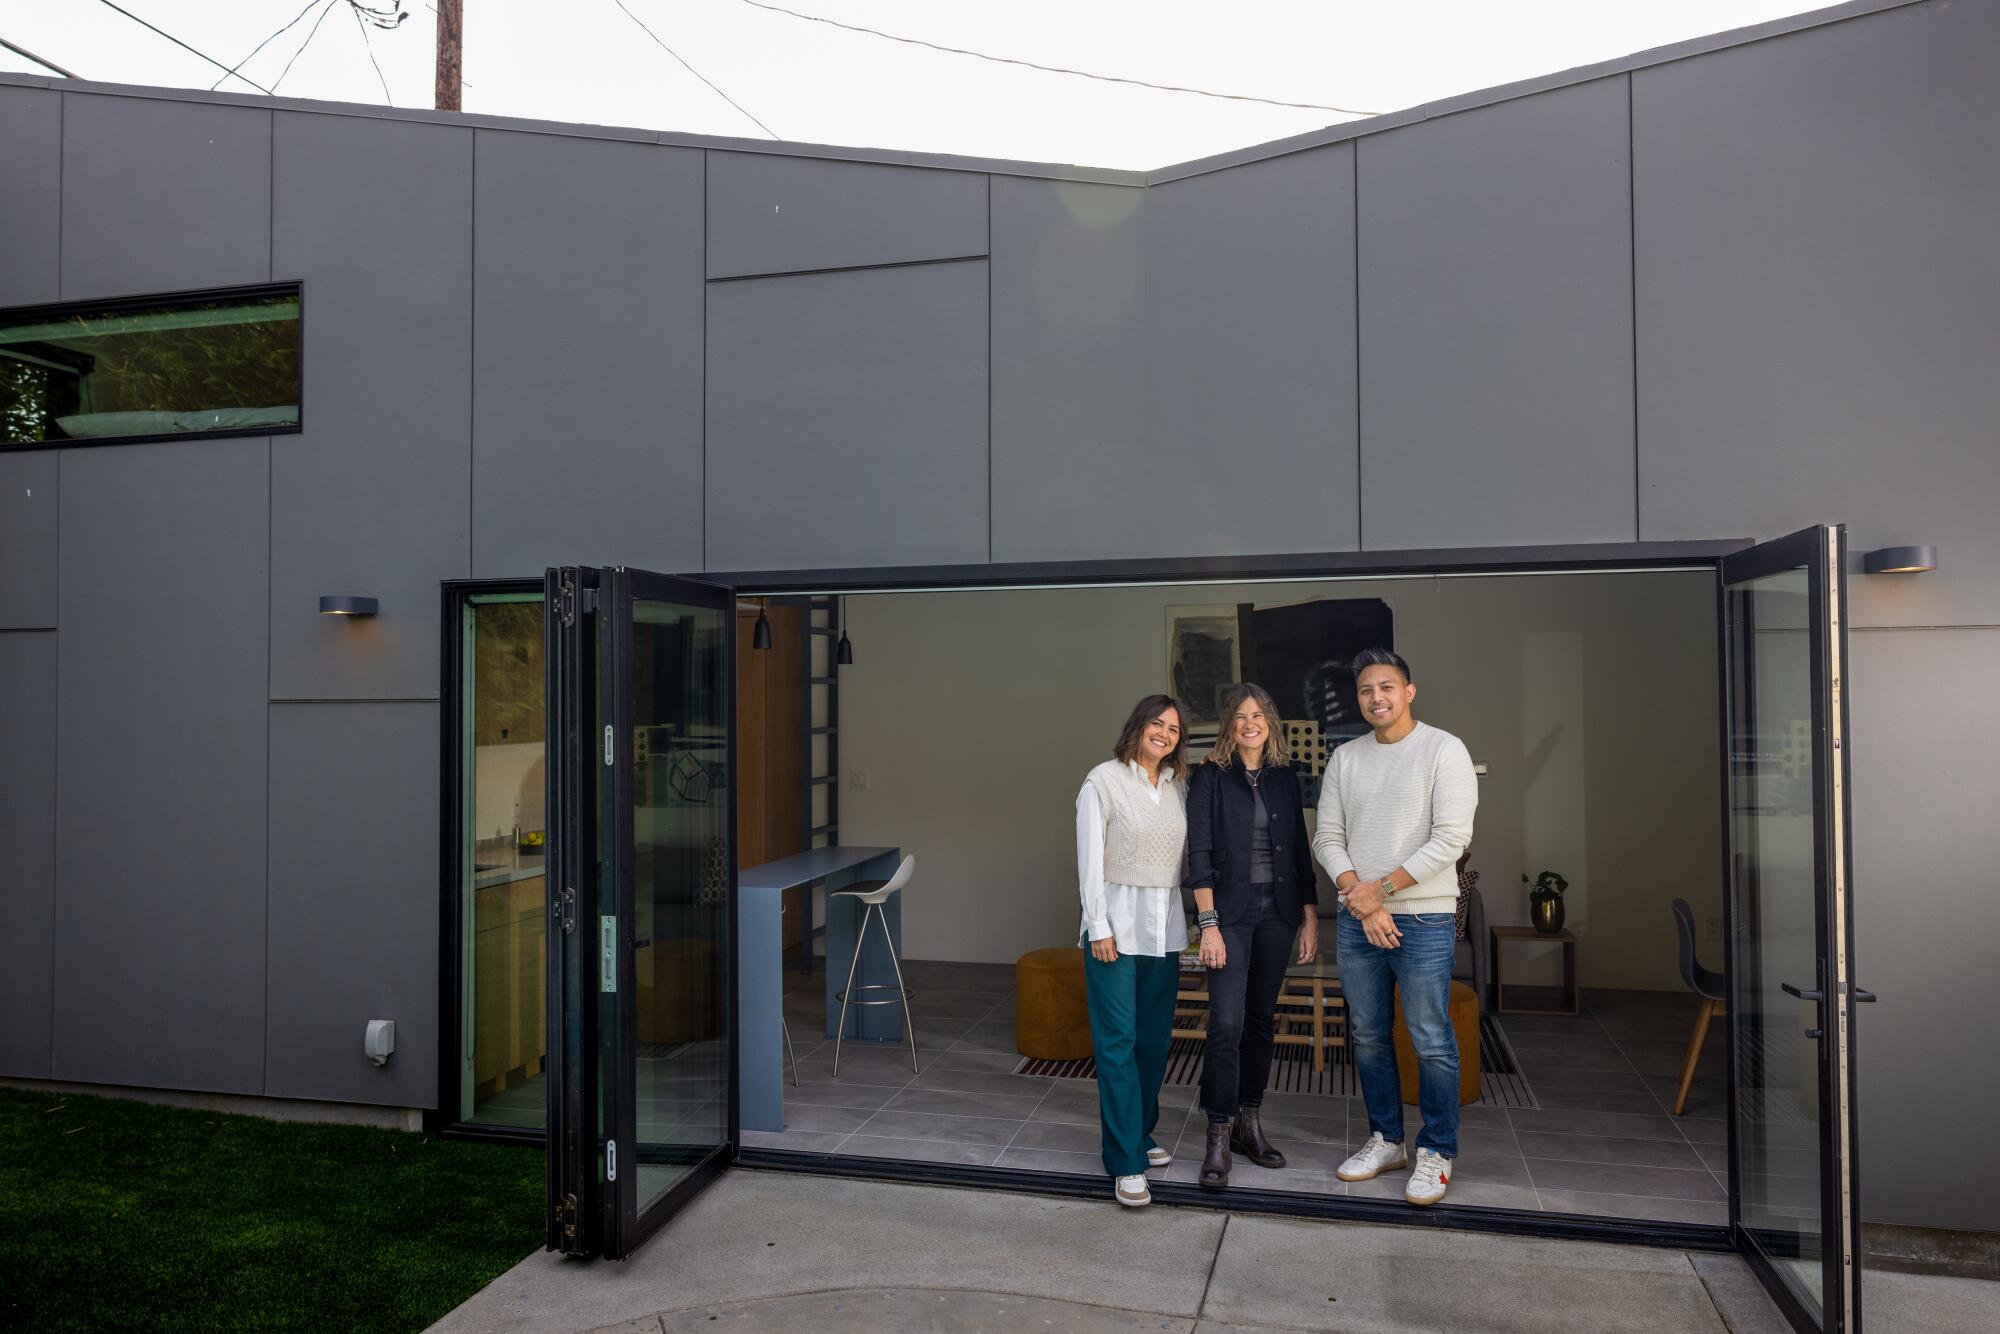 Three people stand in the doorway of an ADU.